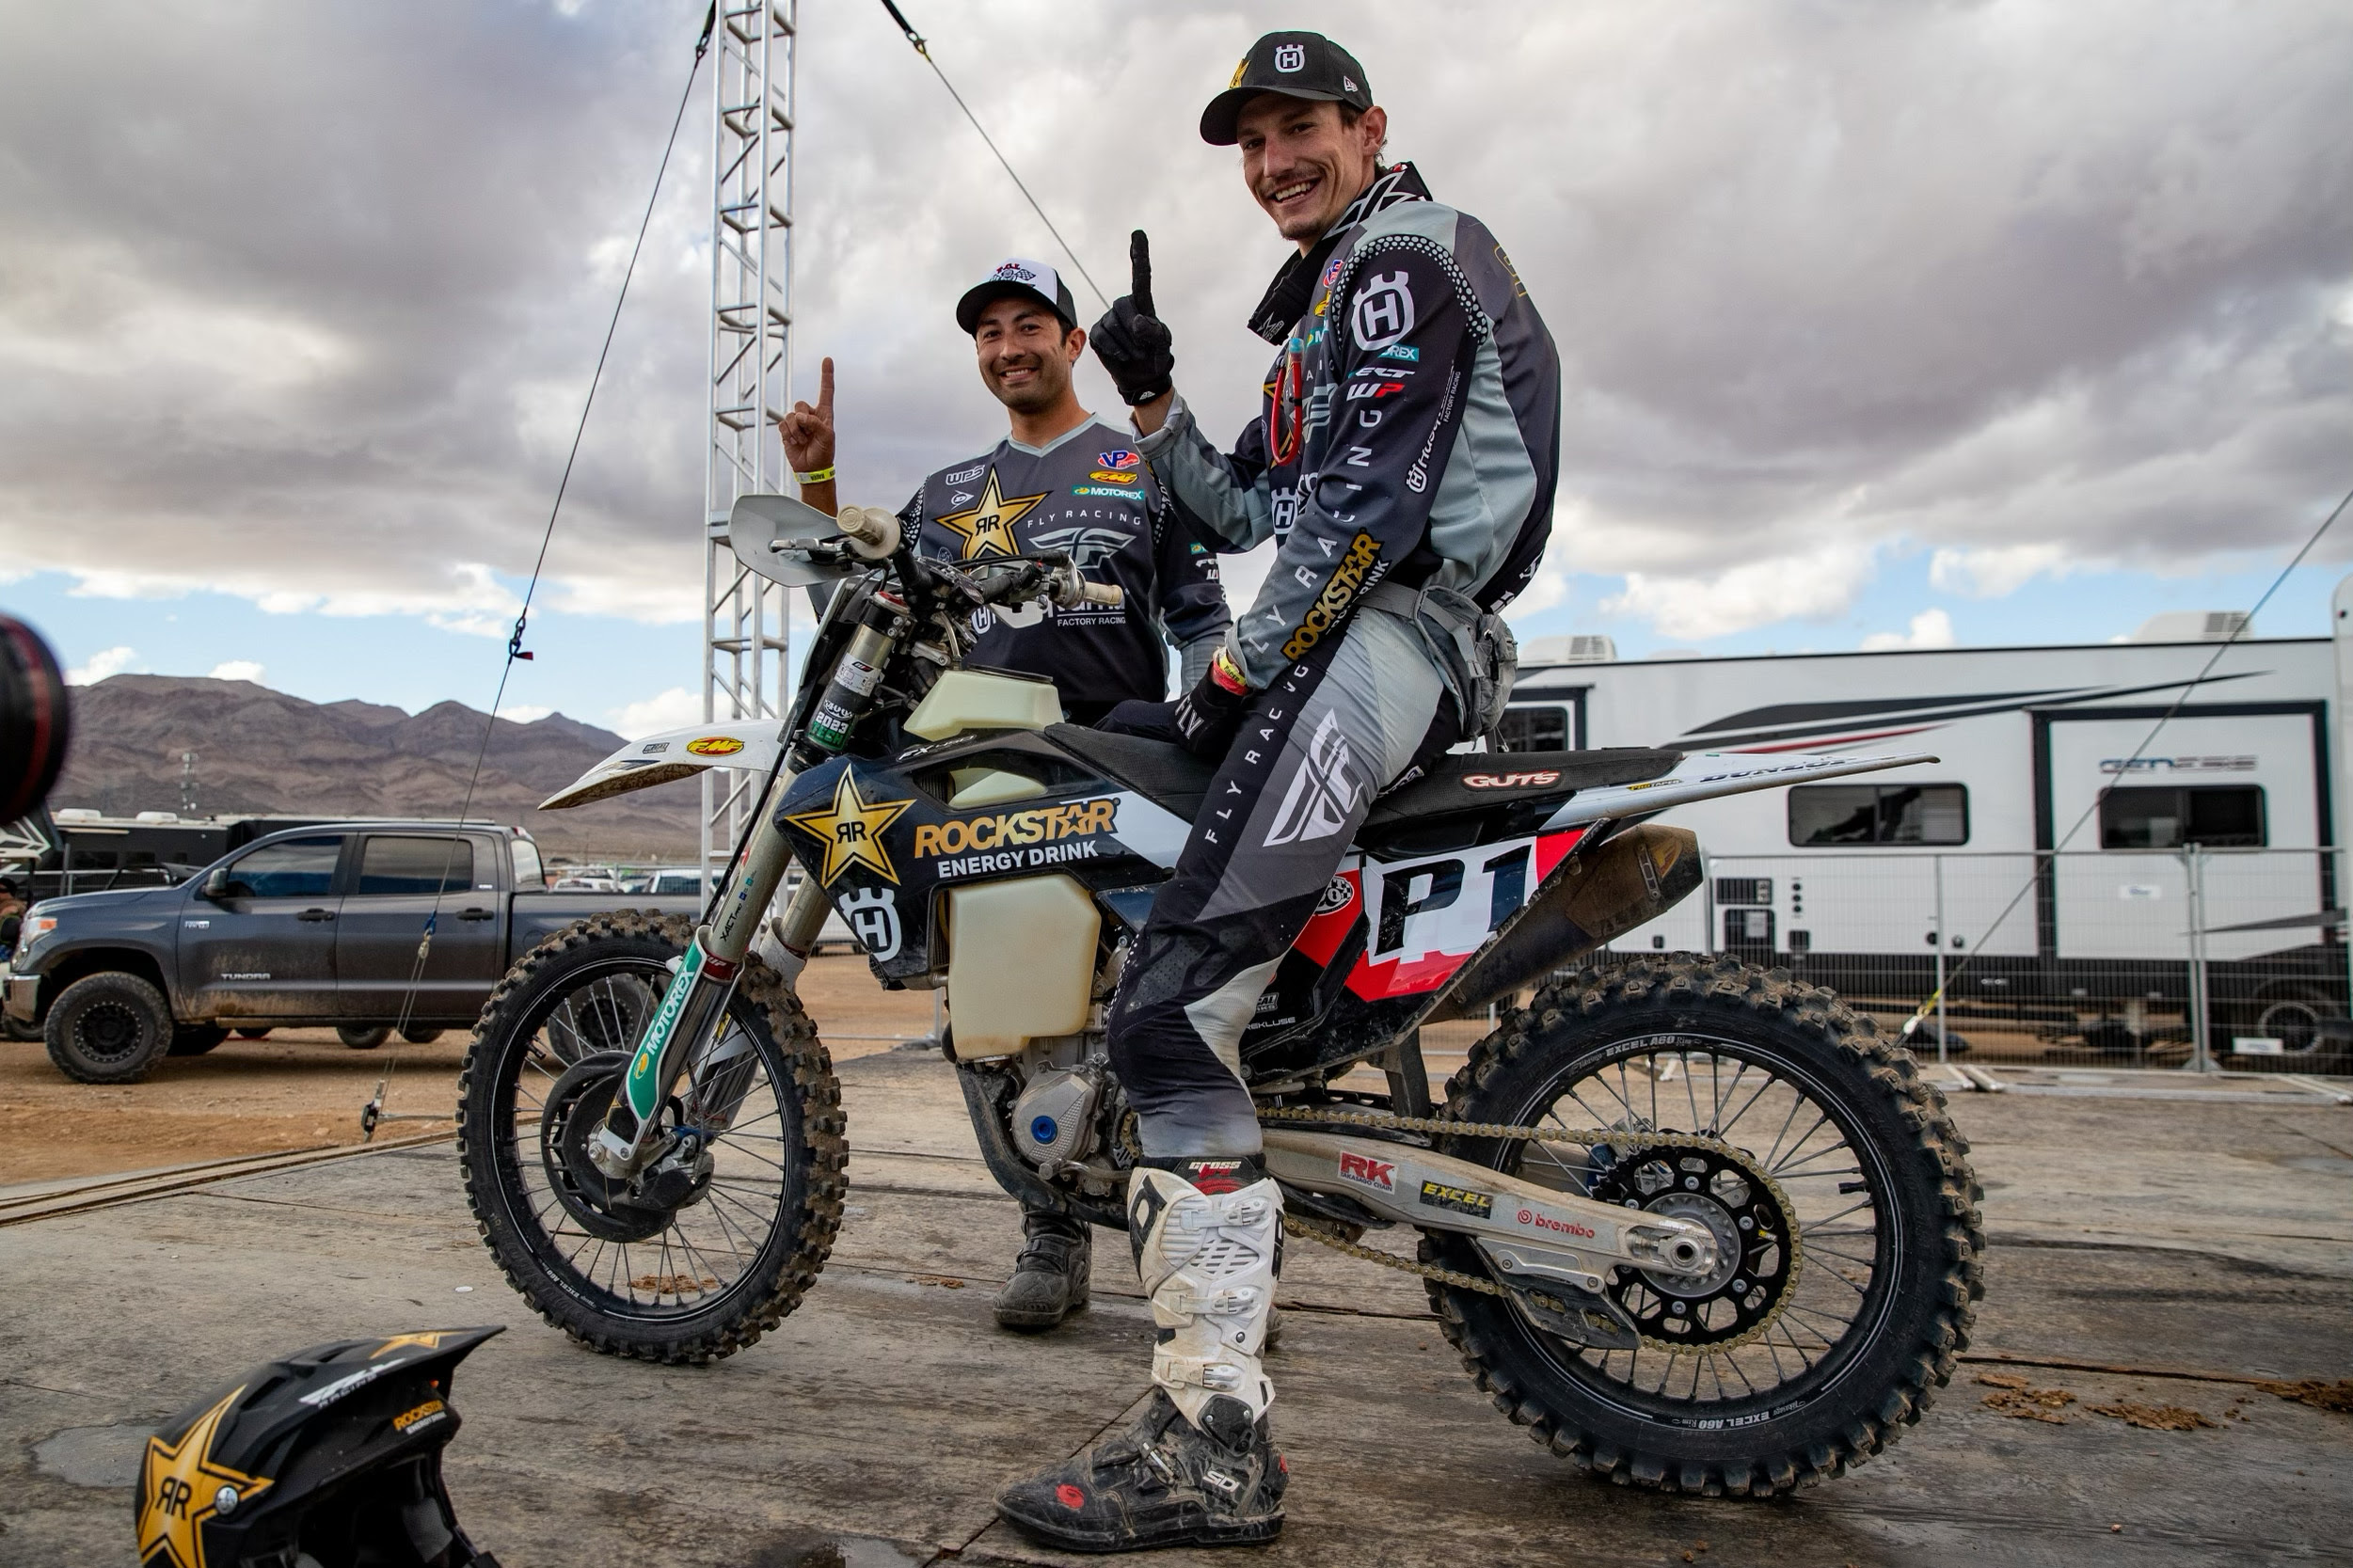 Dalton Shirey Wins Third BFGoodrich Tires Mint 400 Motorcycle Race in Four Years